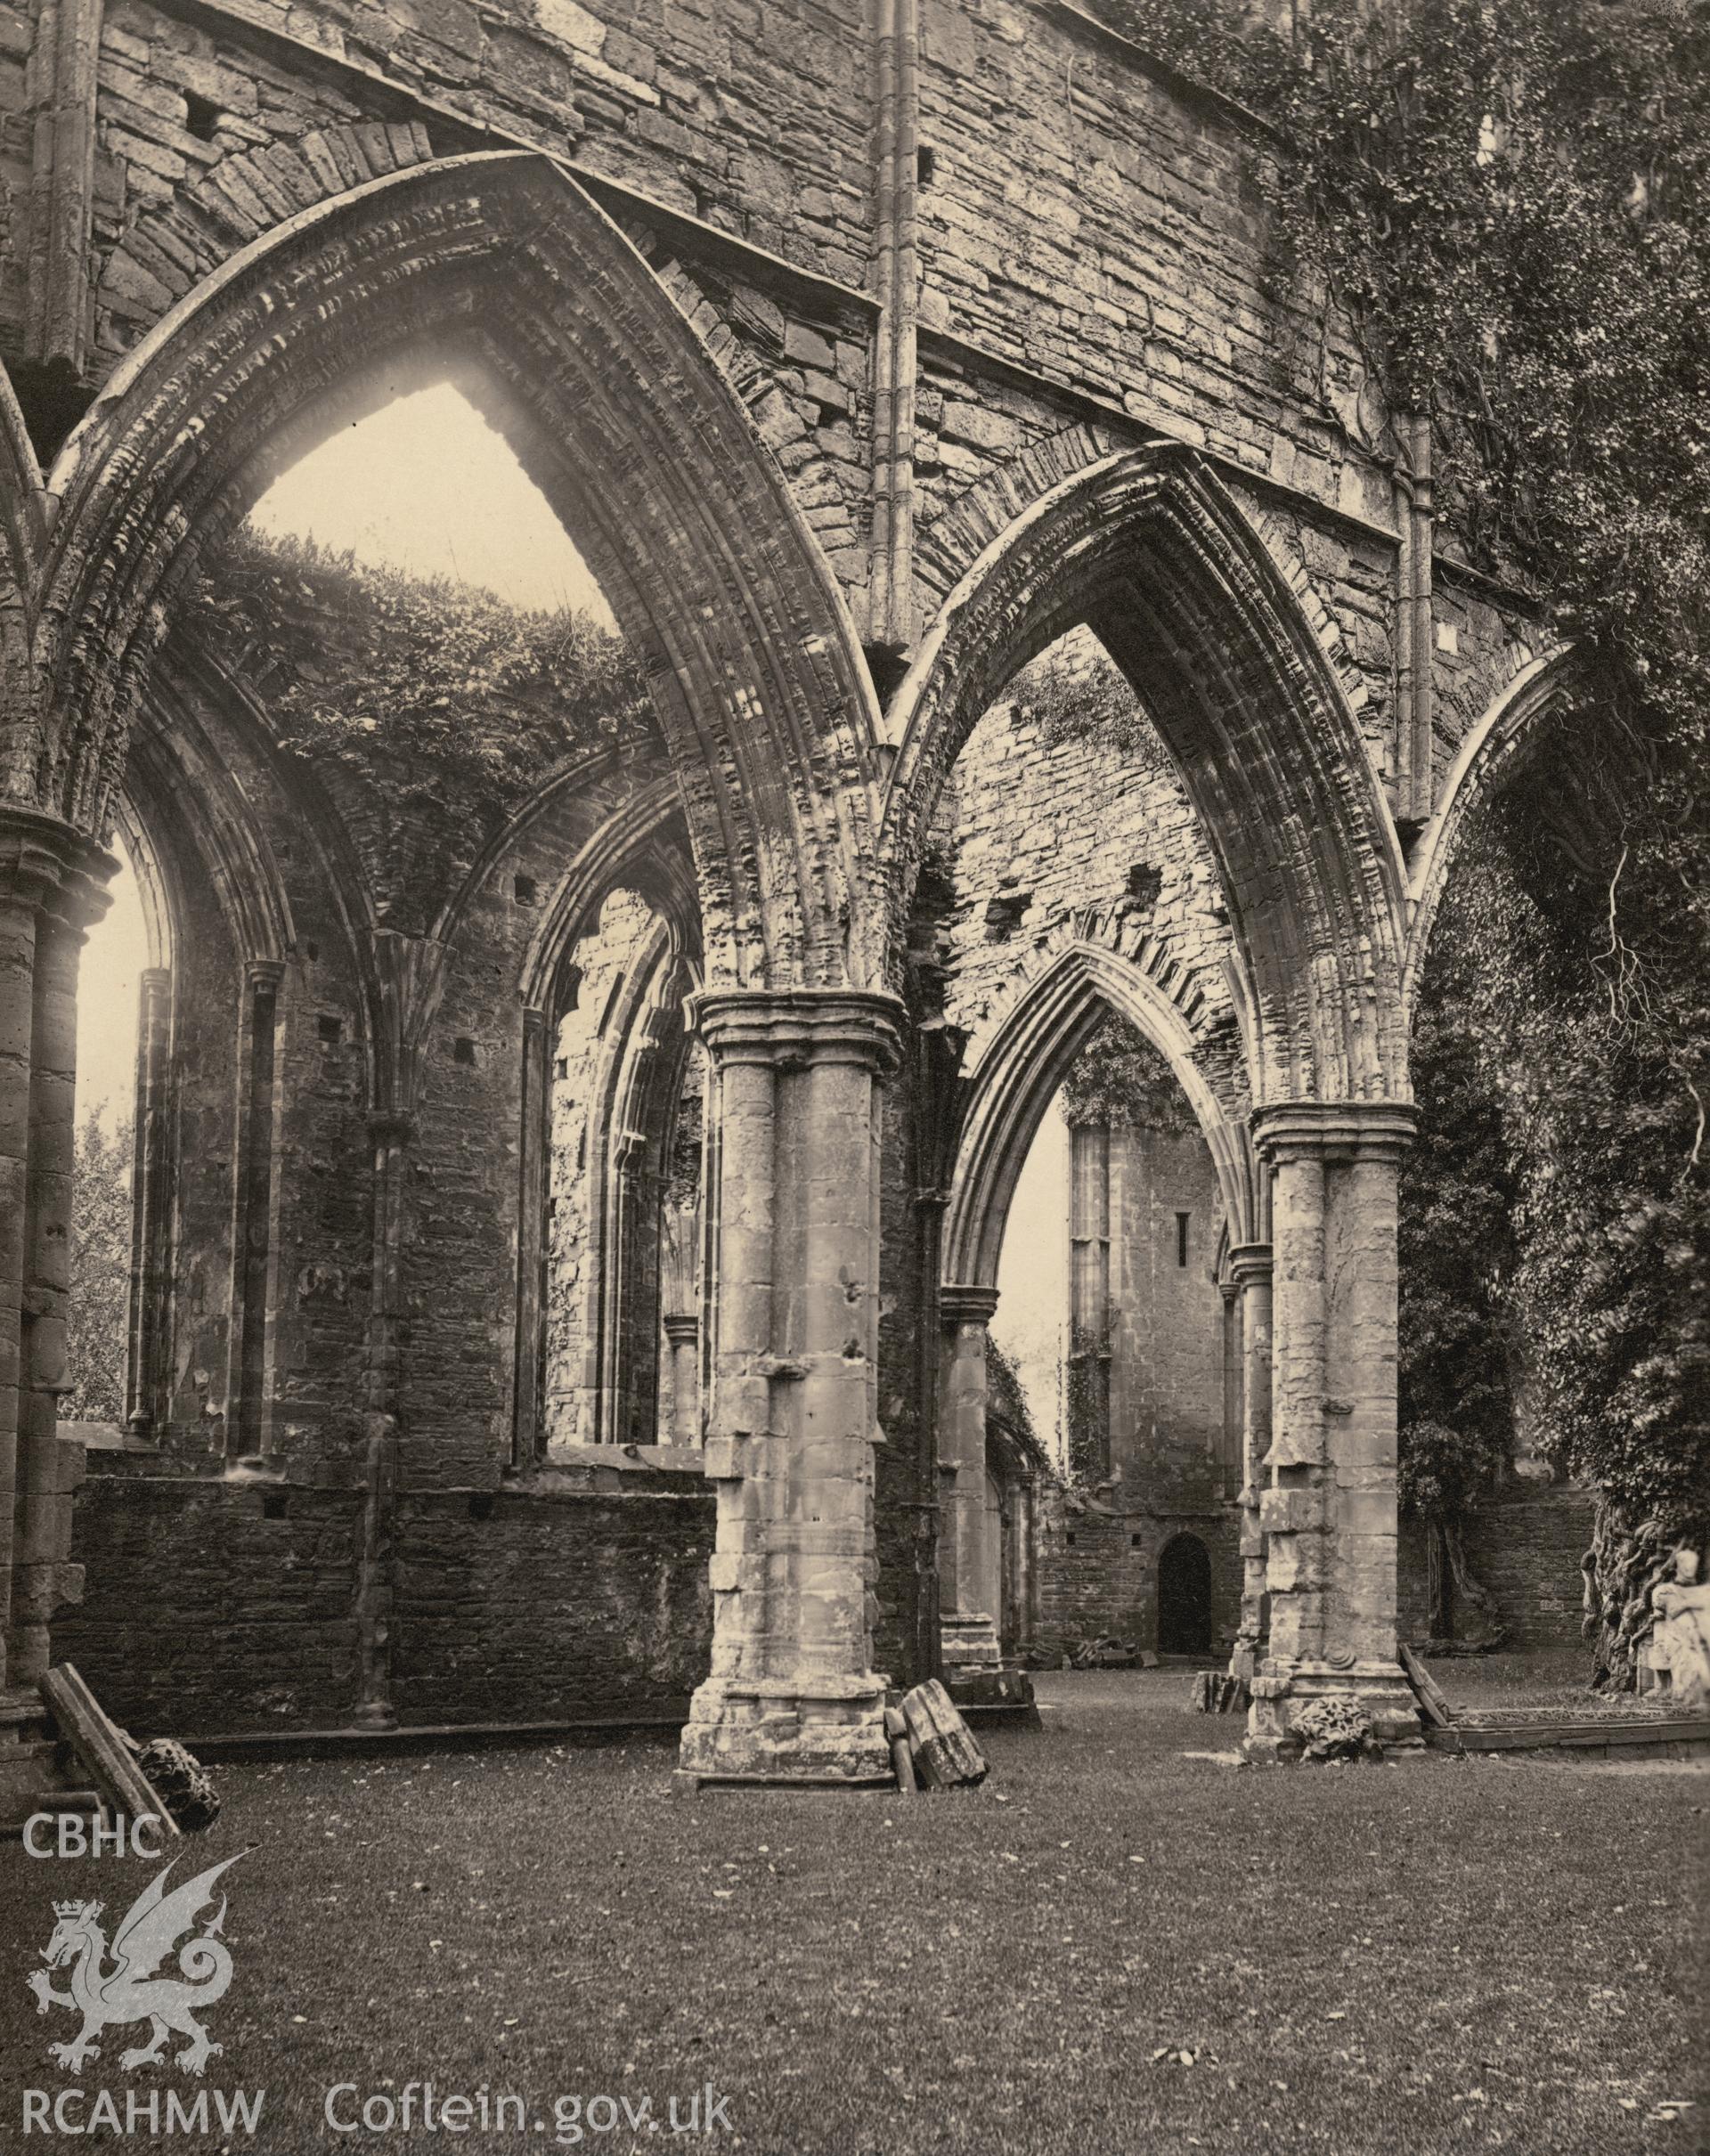 Digital copy of a circa 1870 albumen print showing an interior view of Tintern Abbey looking across the nave.